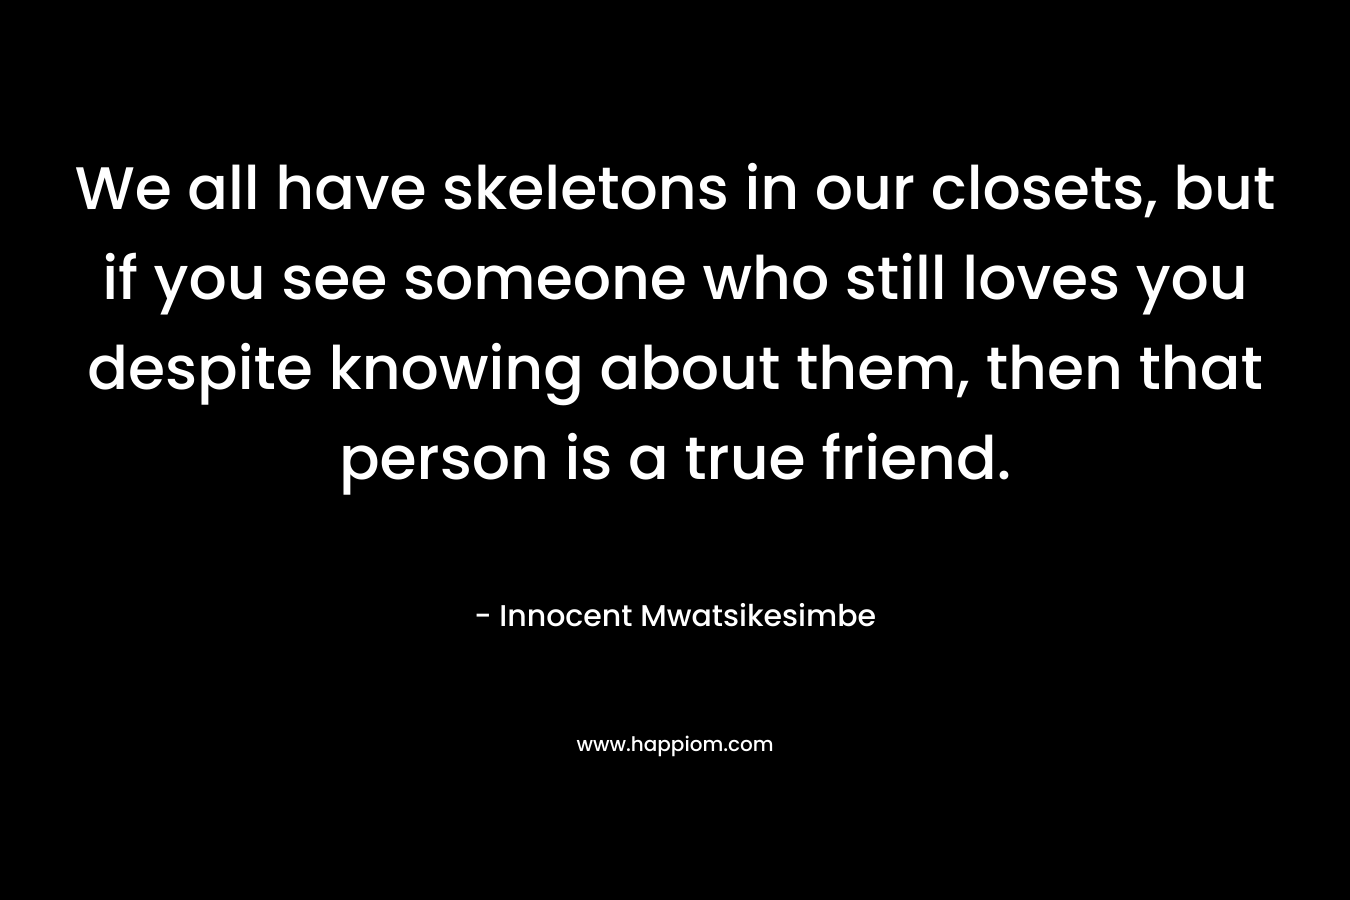 We all have skeletons in our closets, but if you see someone who still loves you despite knowing about them, then that person is a true friend.